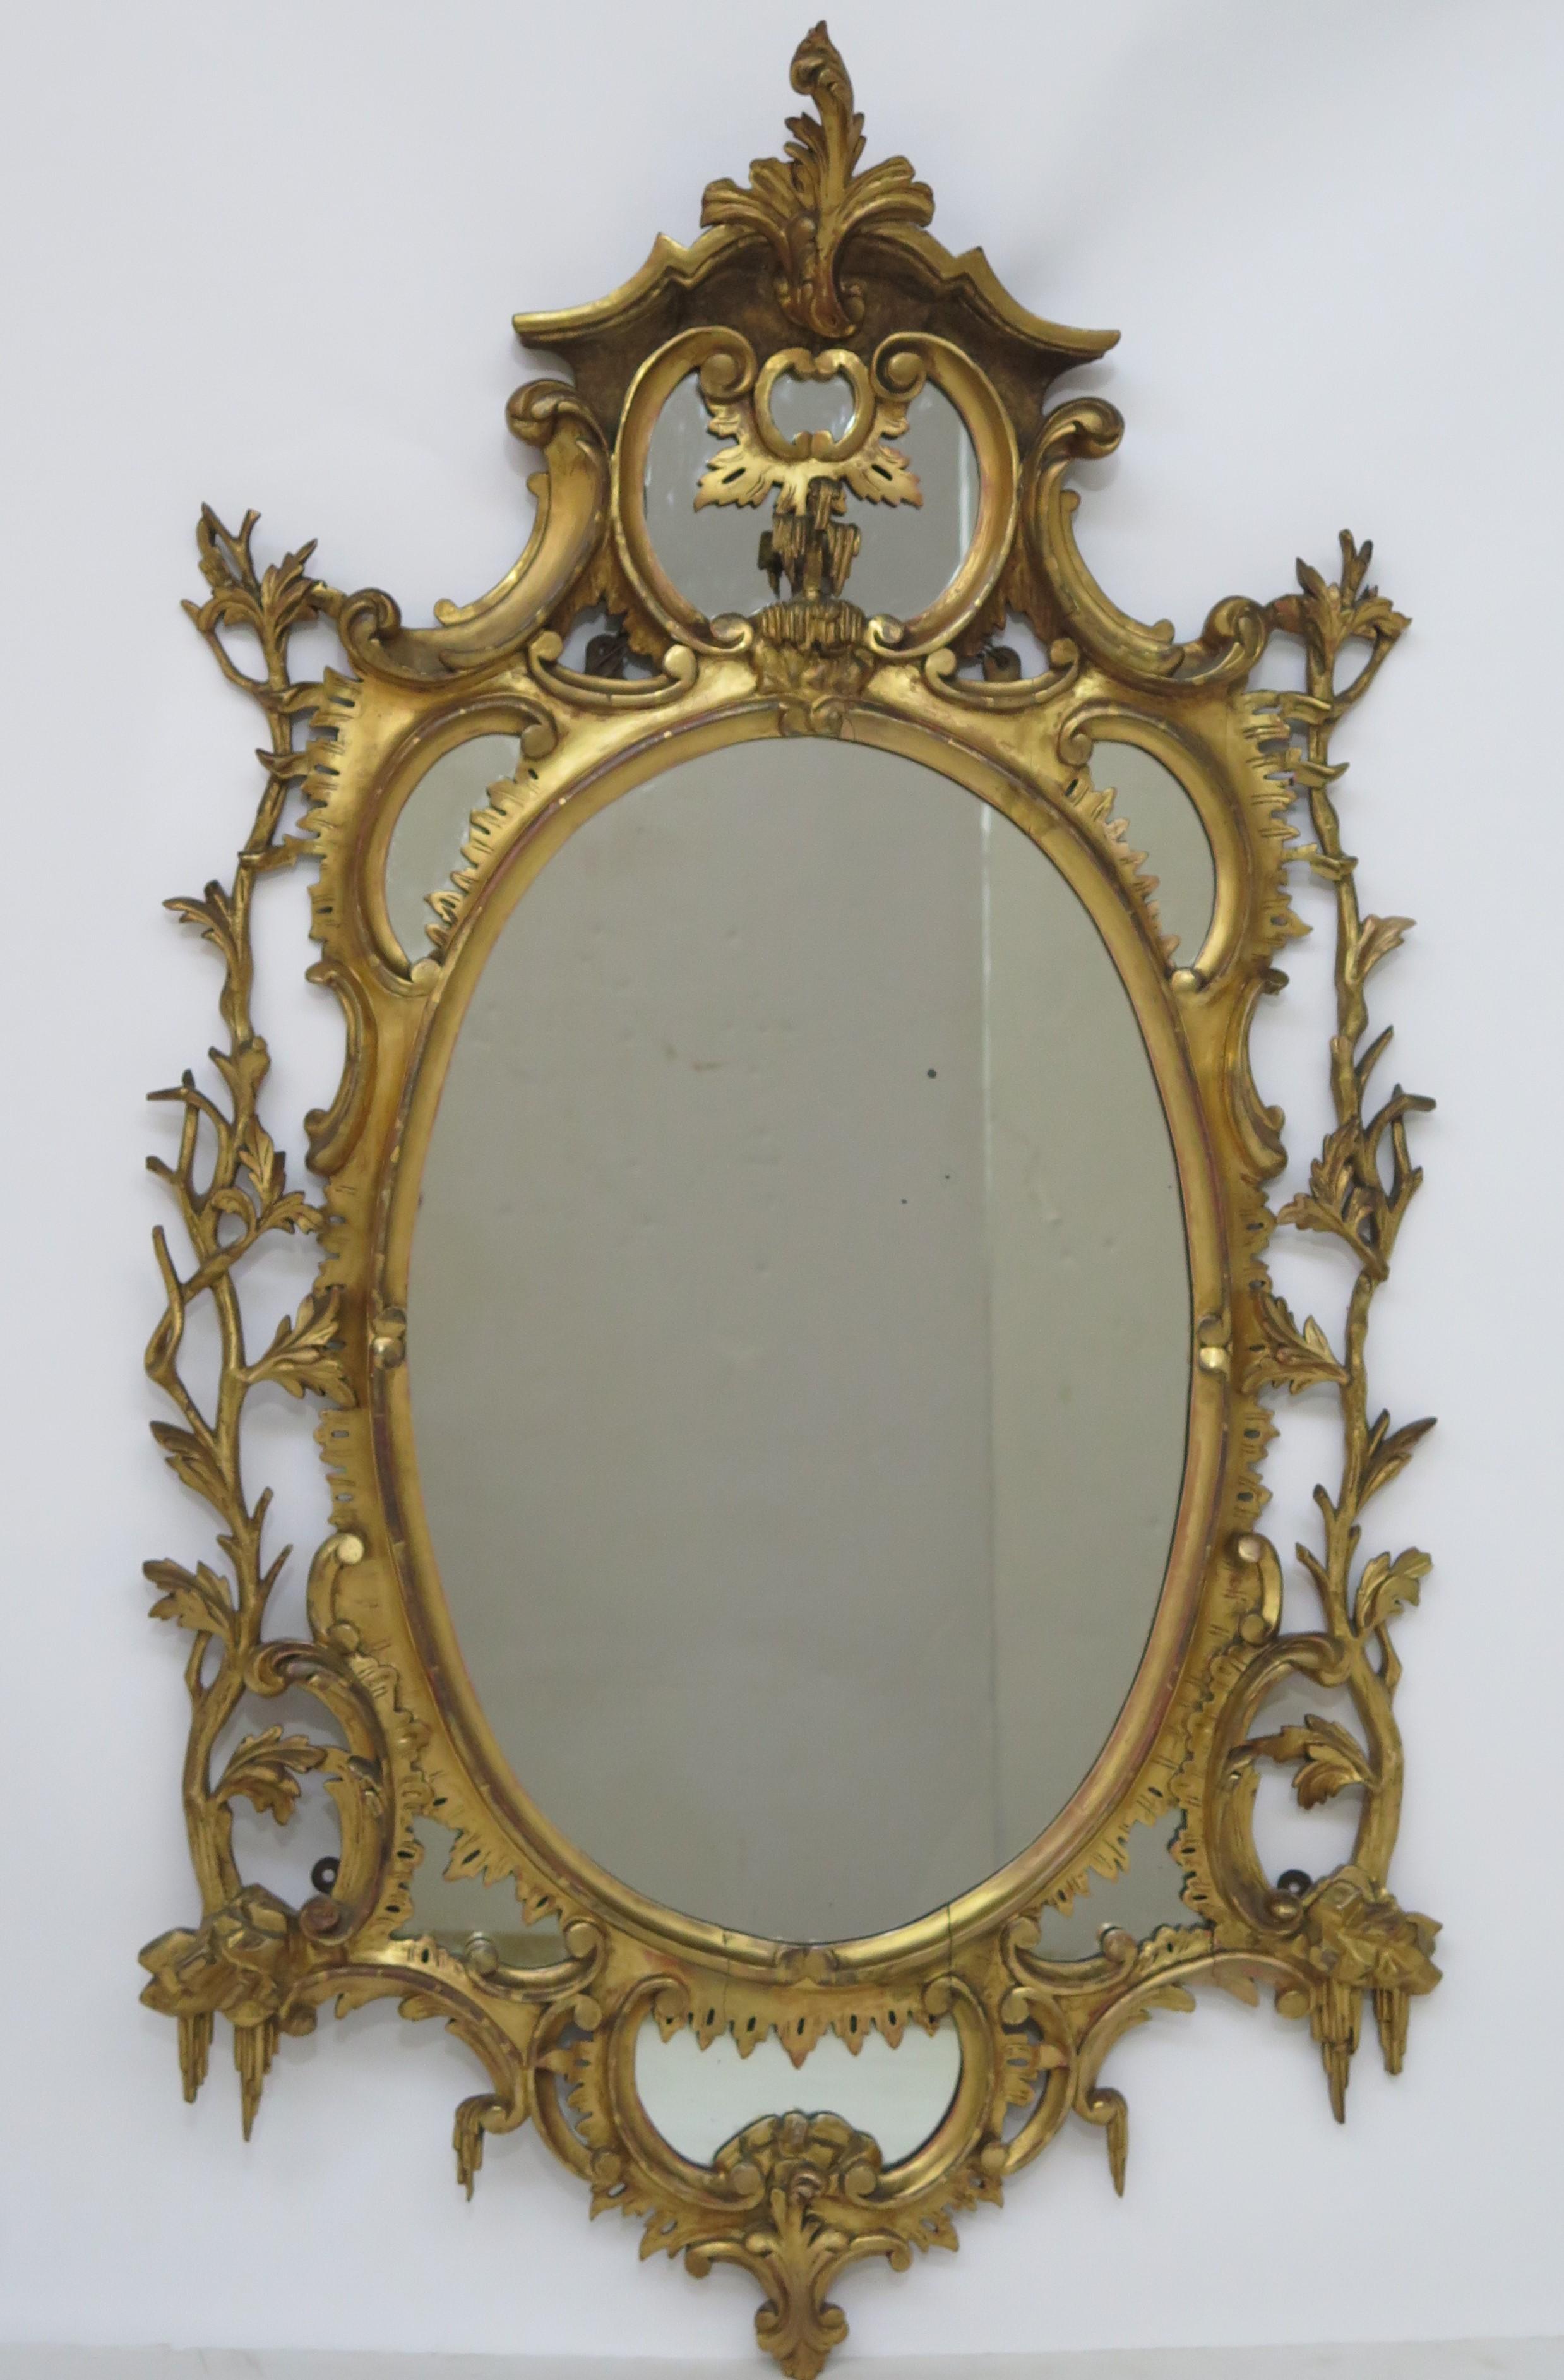 George III carved oval giltwood mirror in the Chippendale style, with elaborately carved molding, of branches and leaves on each side.